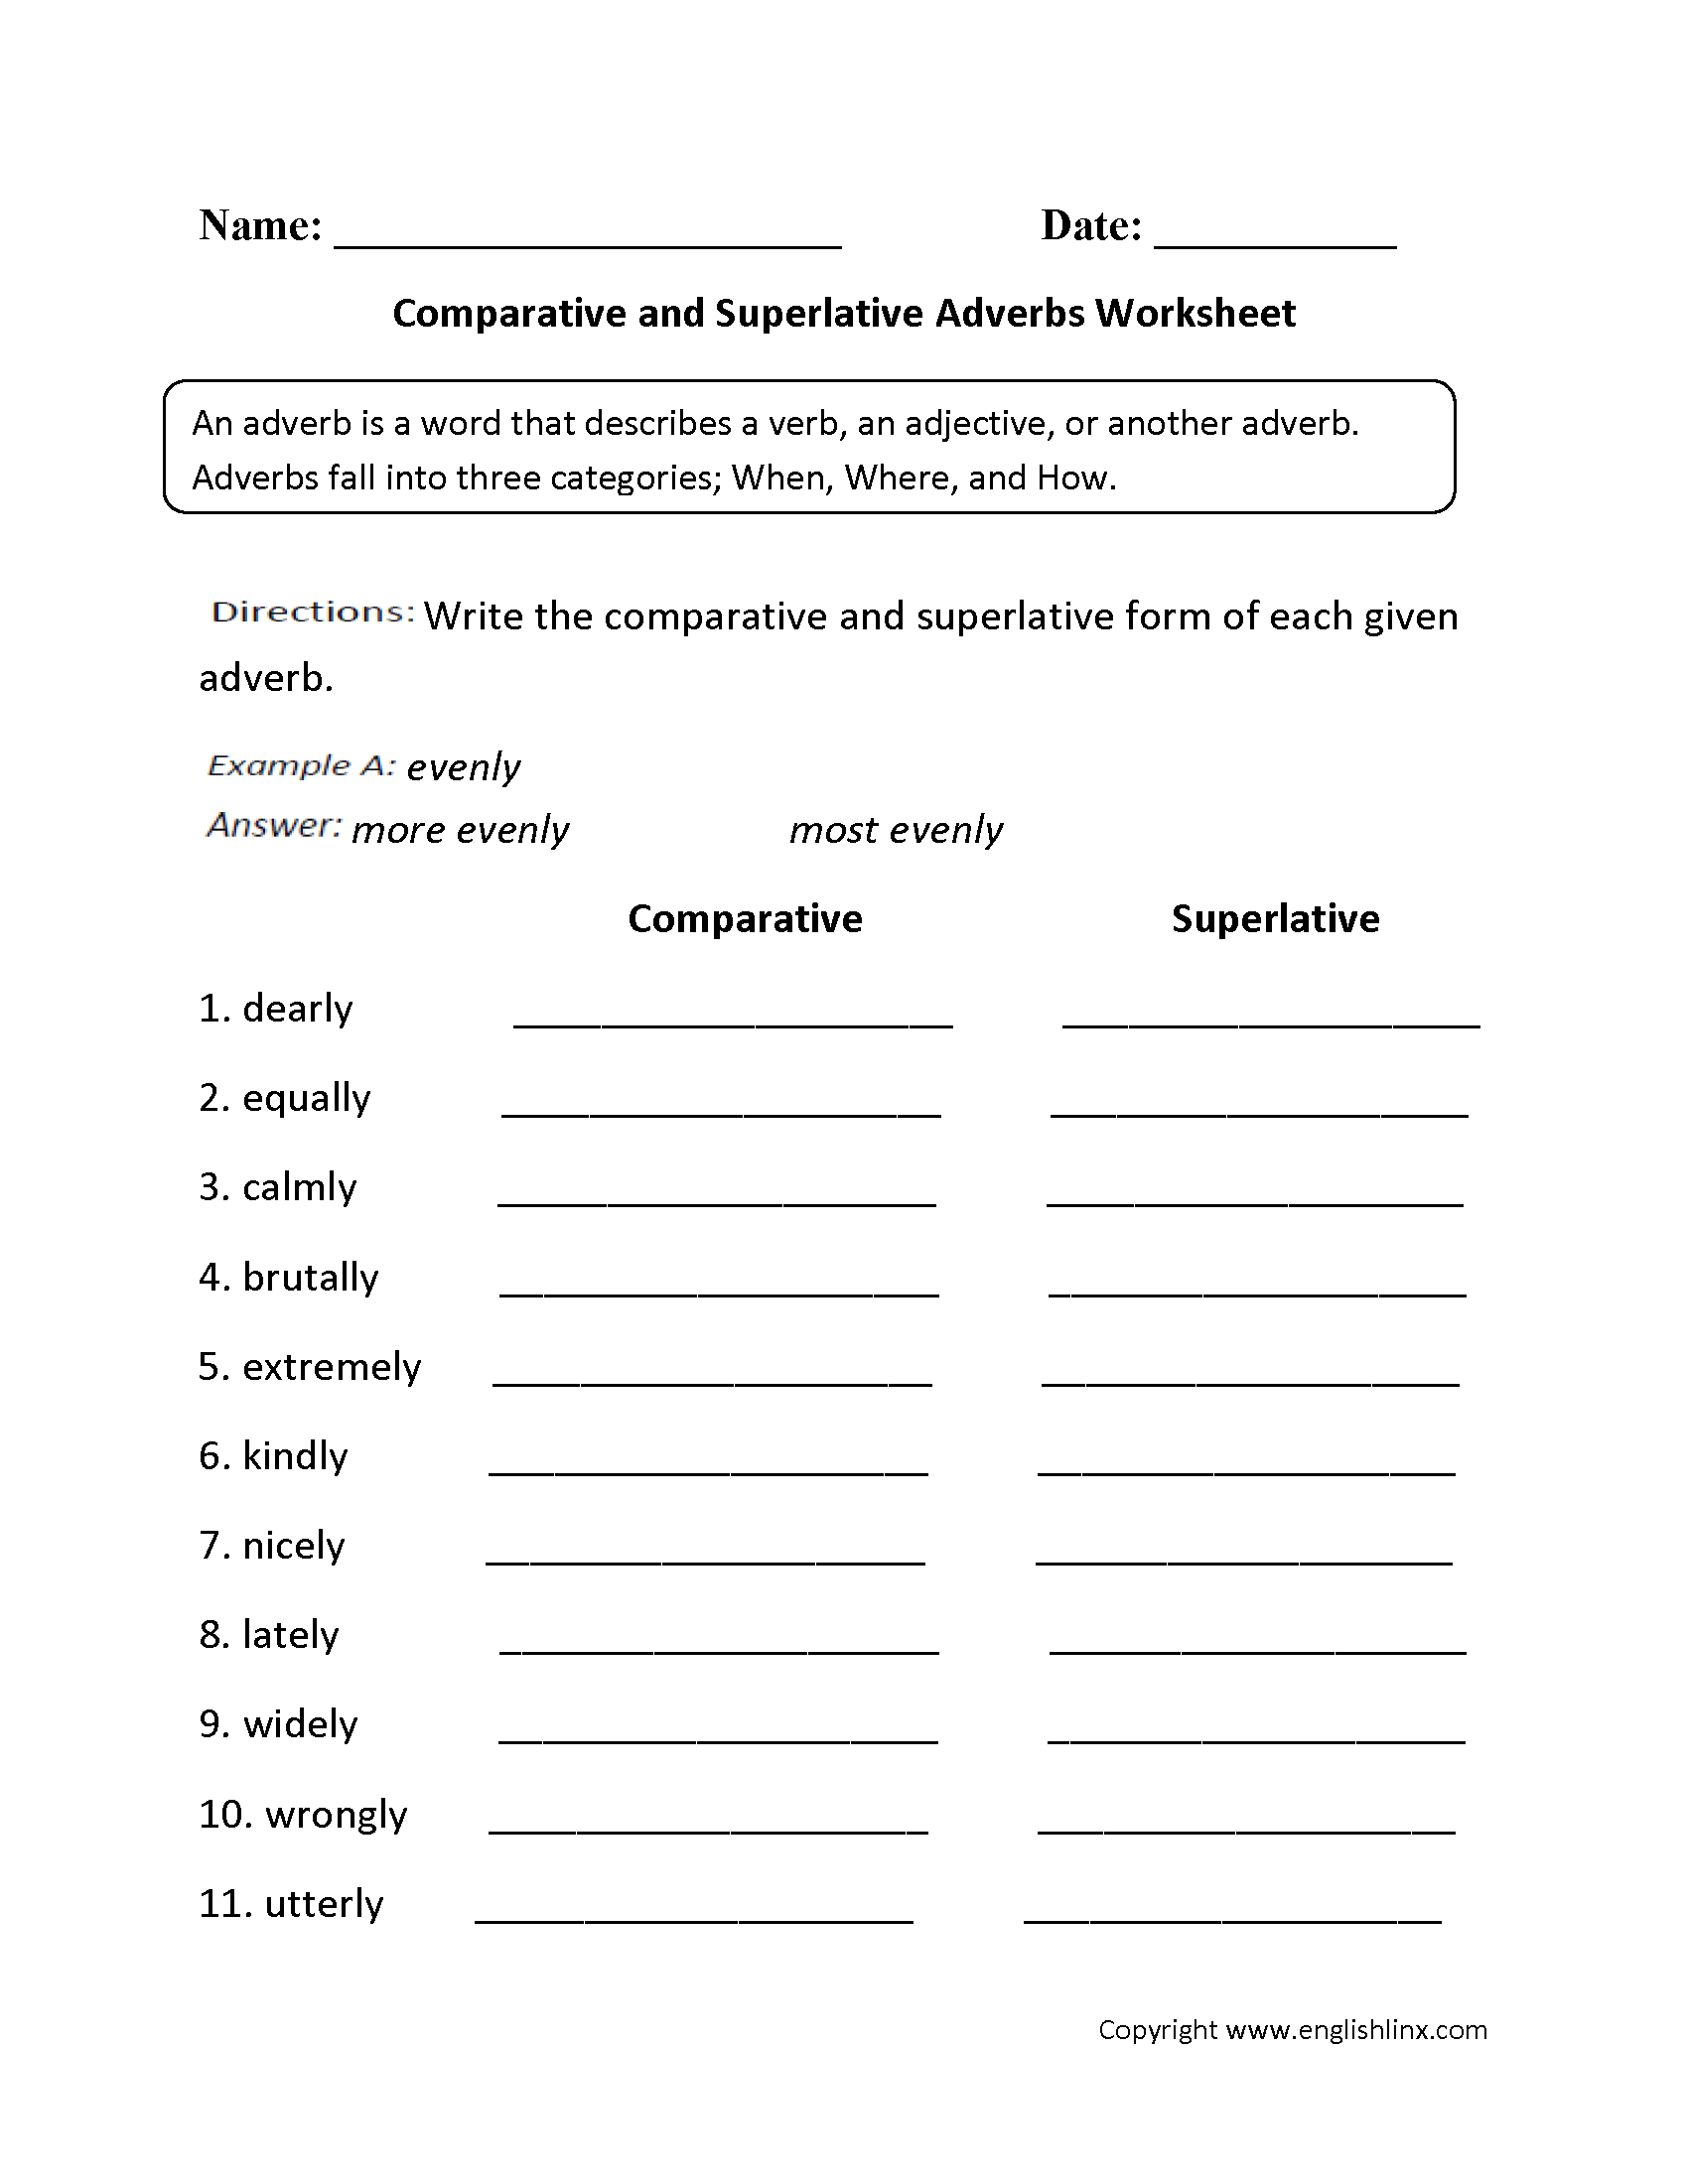 13 Best Images Of Comparatives And Superlative Worksheets Easy Comparative And Superlative